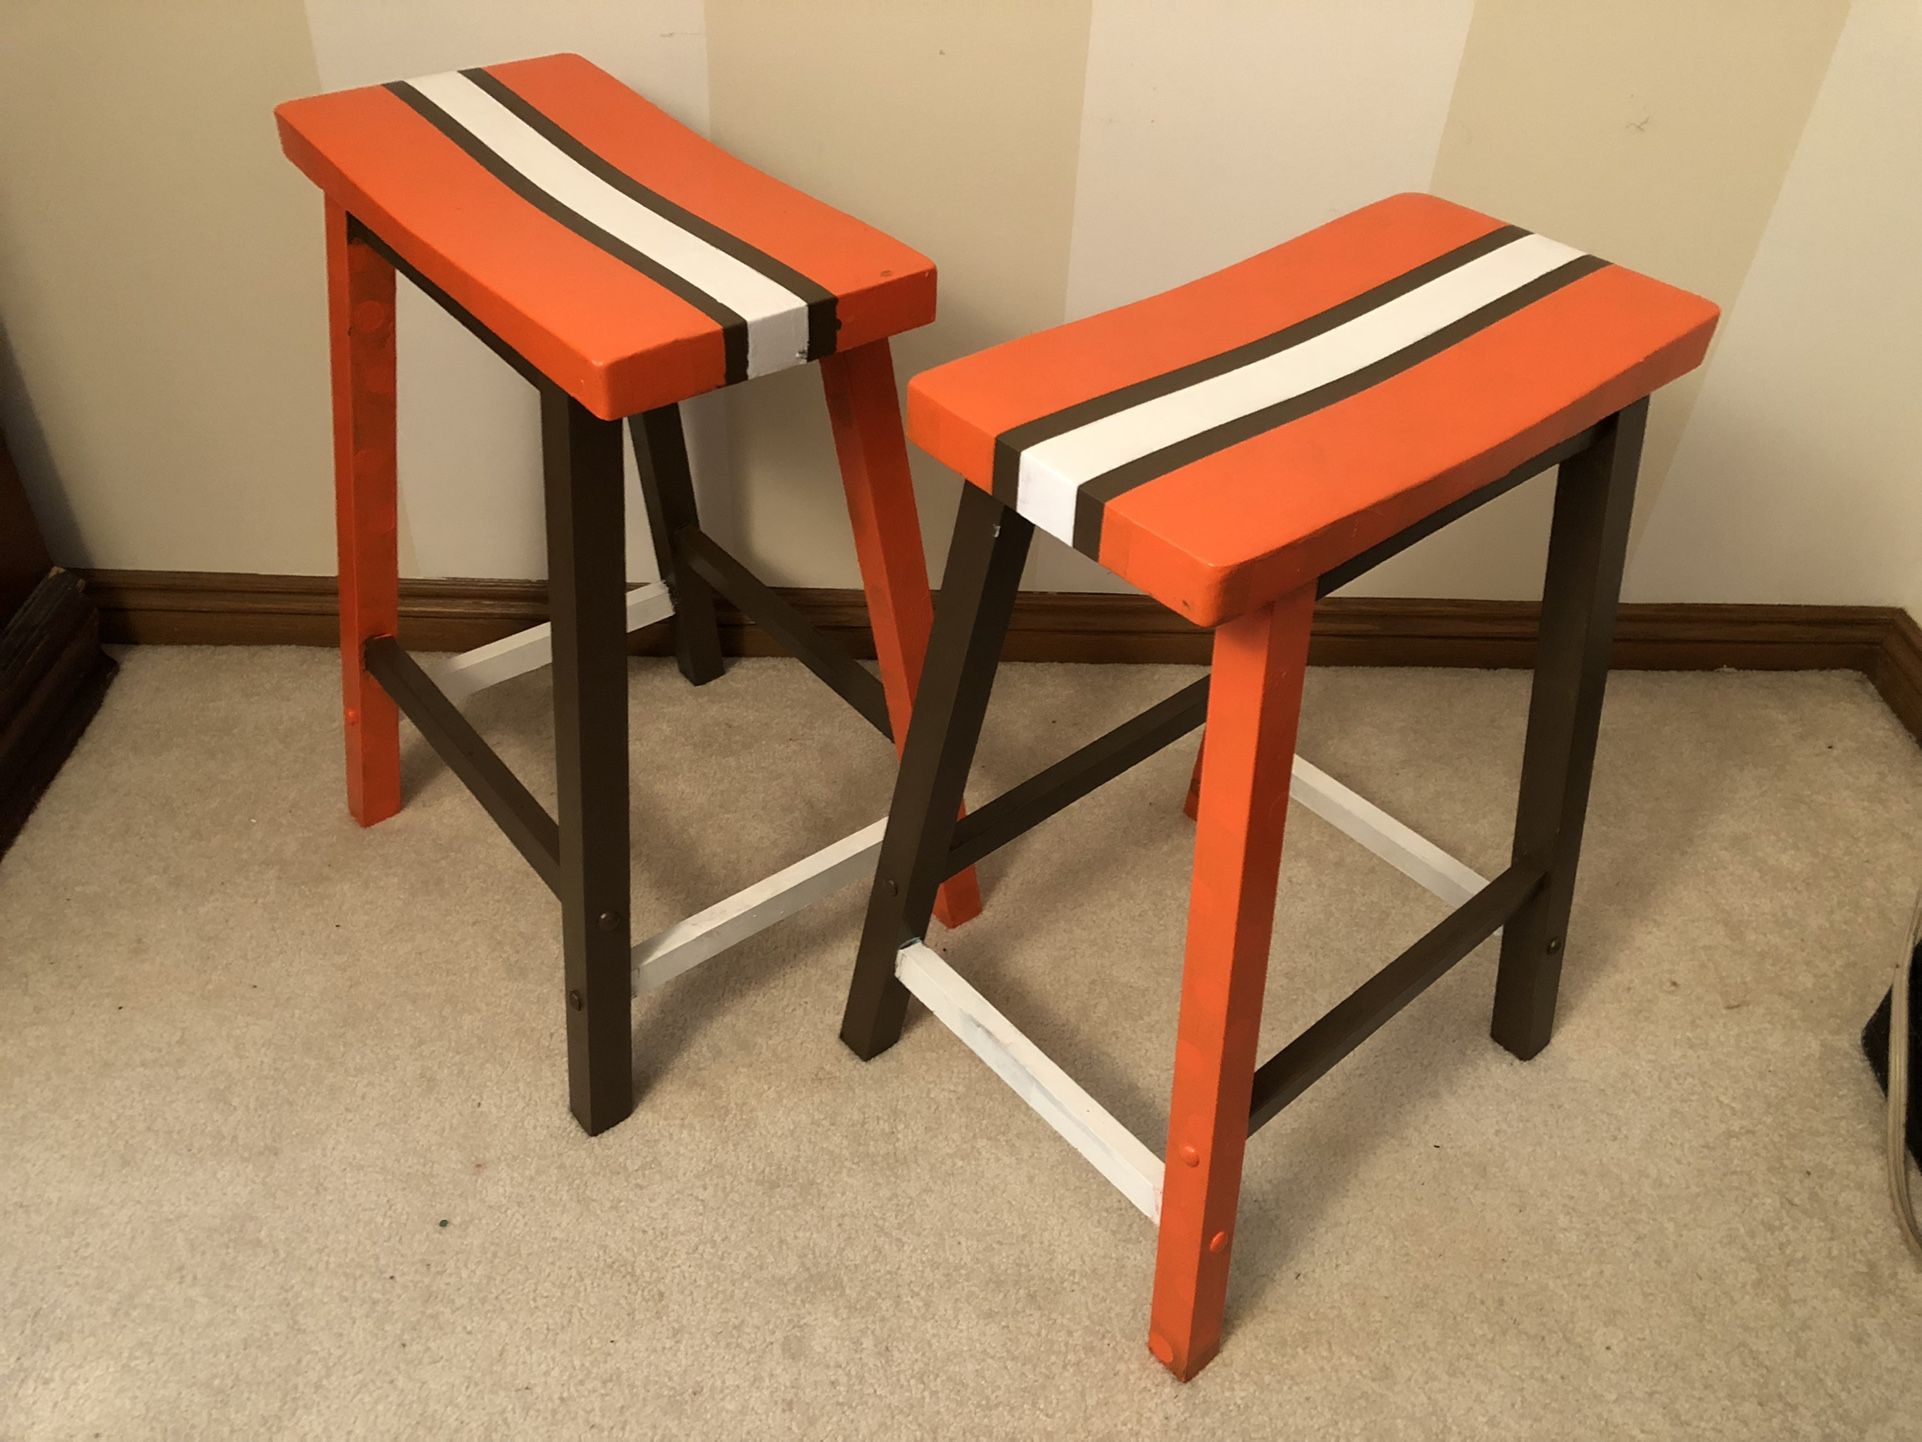 Cleveland Browns Inspired wooden Stools  Handpainted By Artist 17” X  9” By 24” Tall 